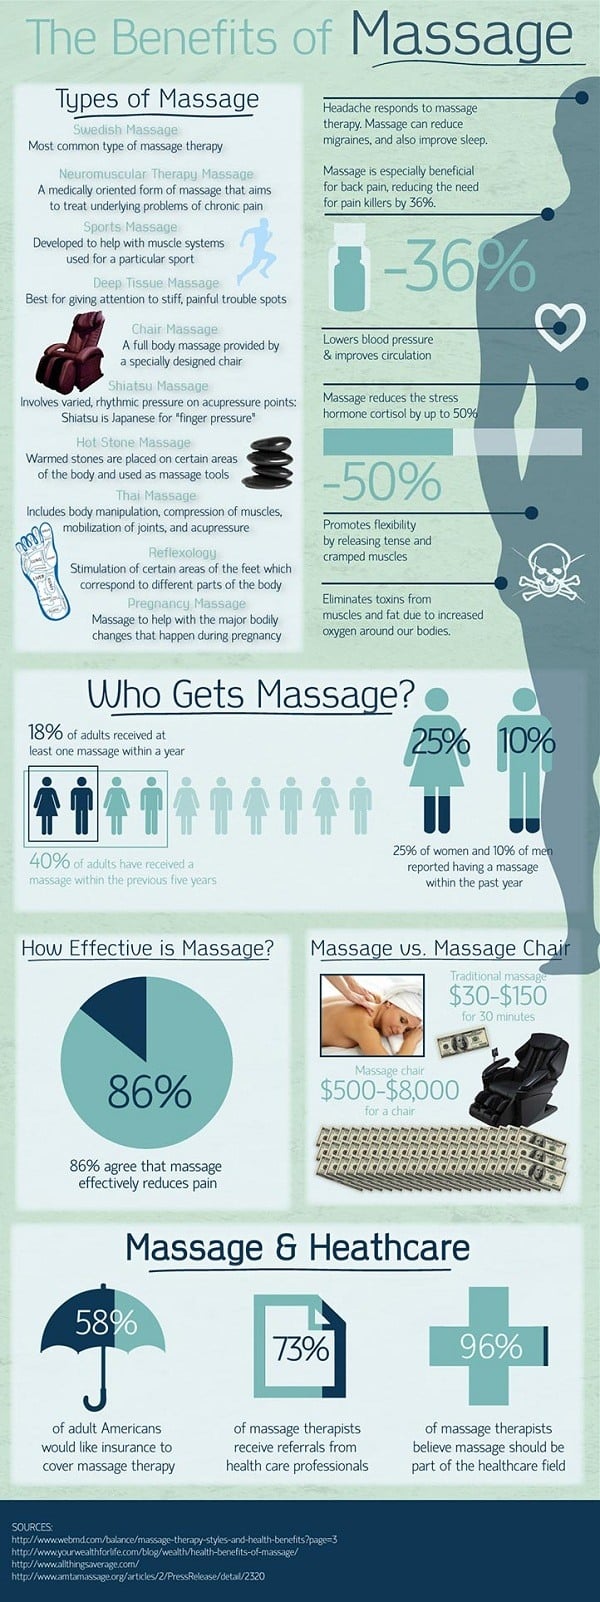 The Benefits of a Massage Infographic